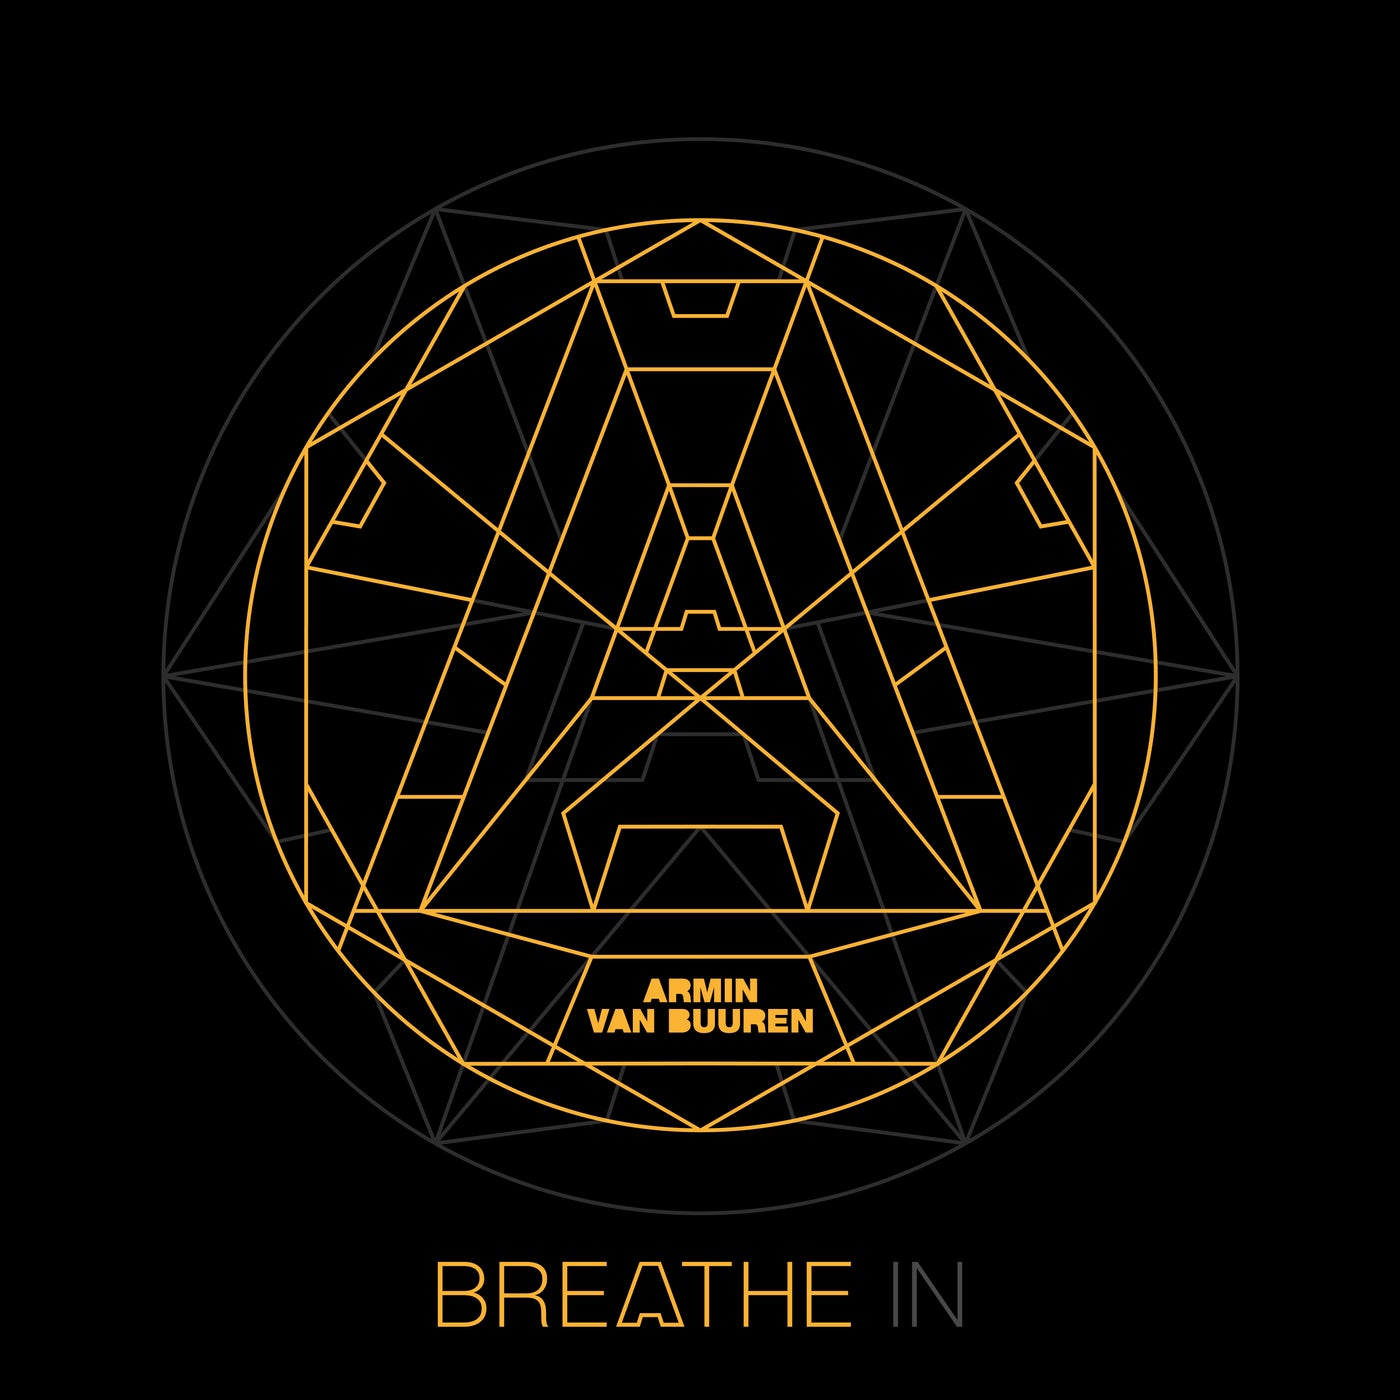 Breathe In - Extended Versions